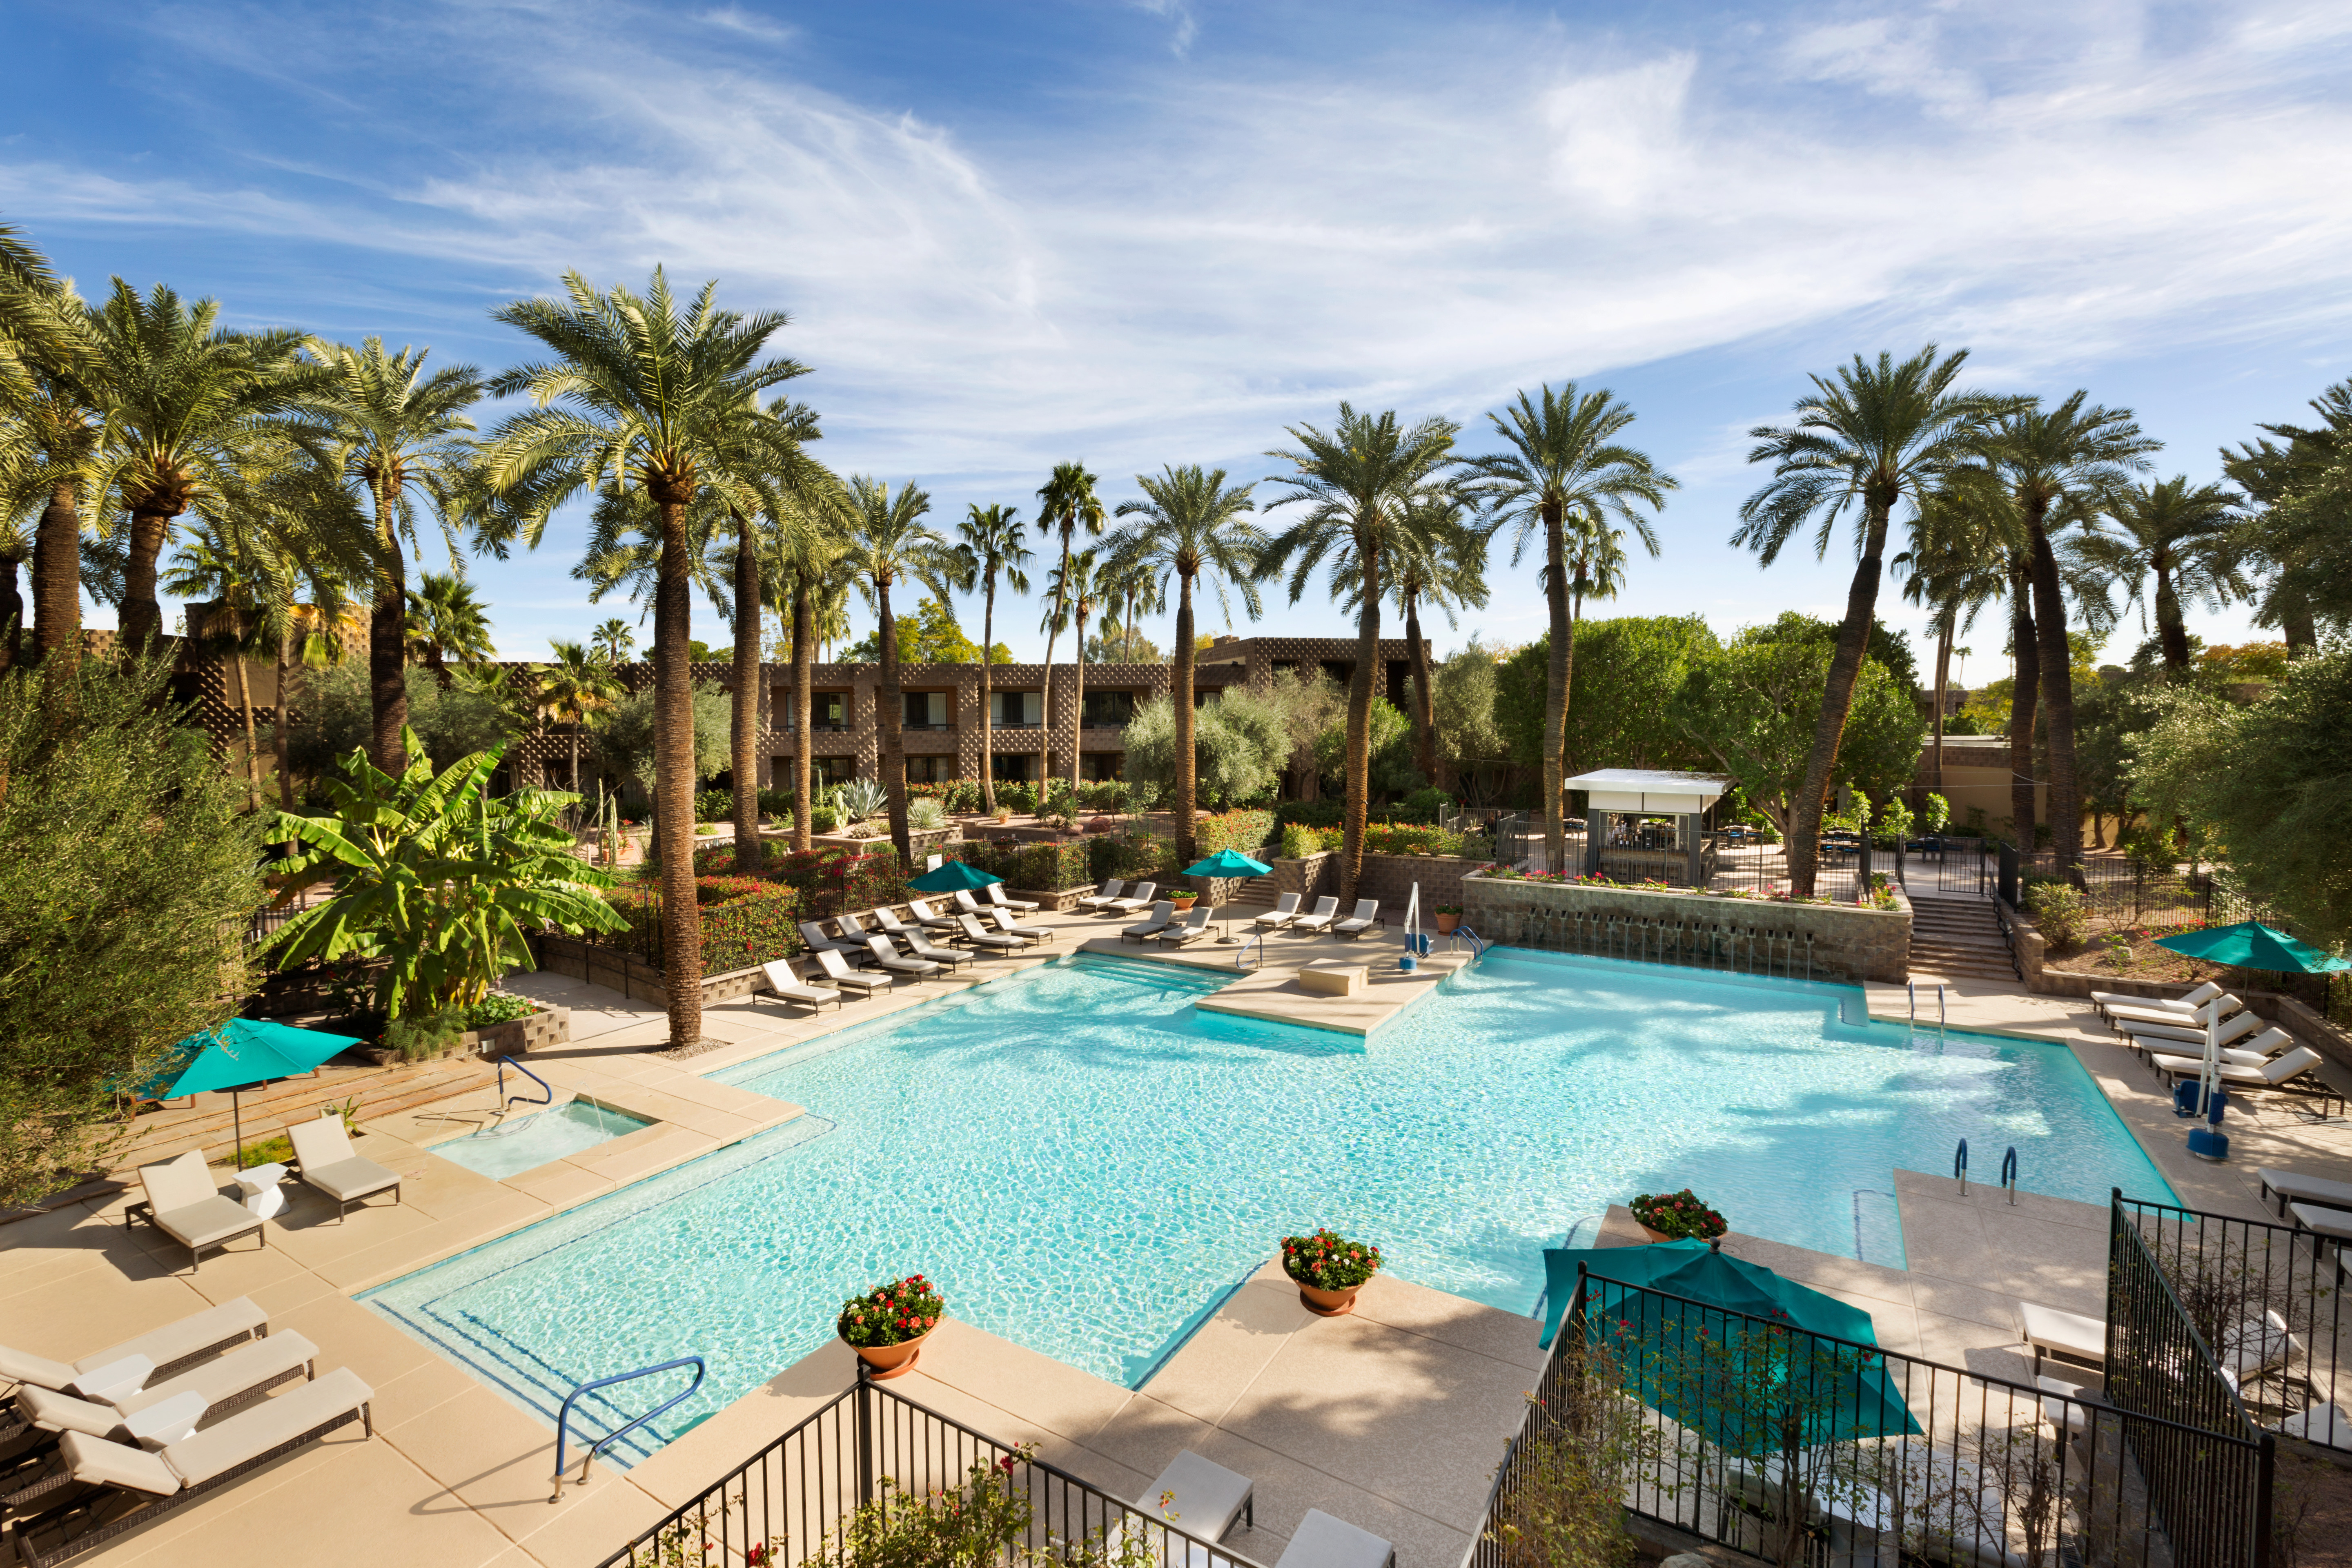 Daytime View of Green Sun Umbrellas, and Loungers by North Outdoor Pool Surrounded by Palm Trees and Hotel Exterior in Background